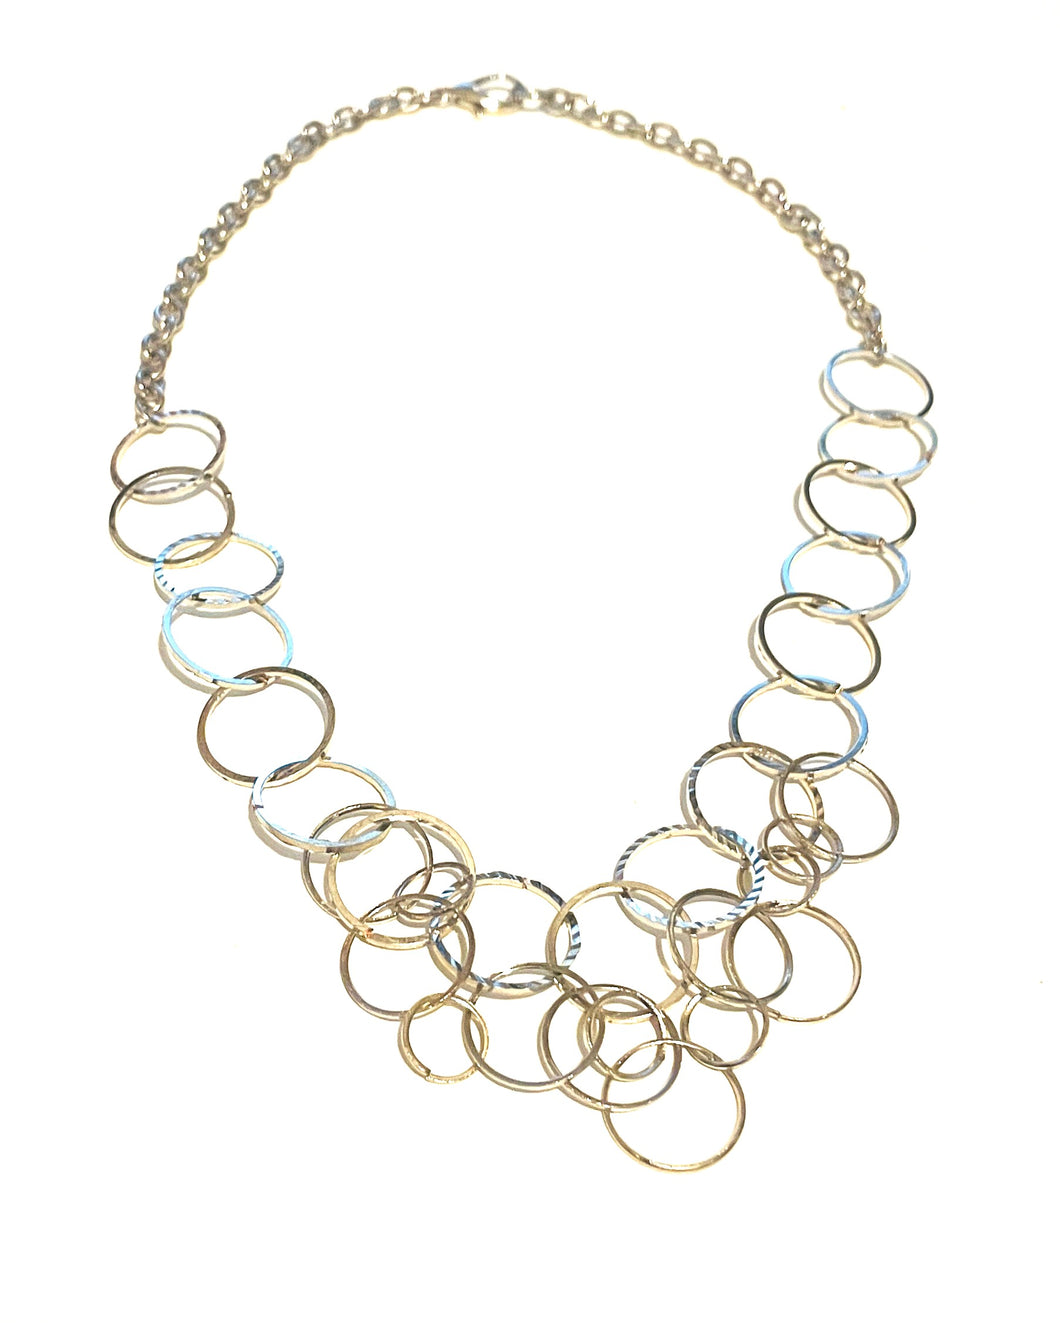 Statement Necklace Silver Circle Link Necklace